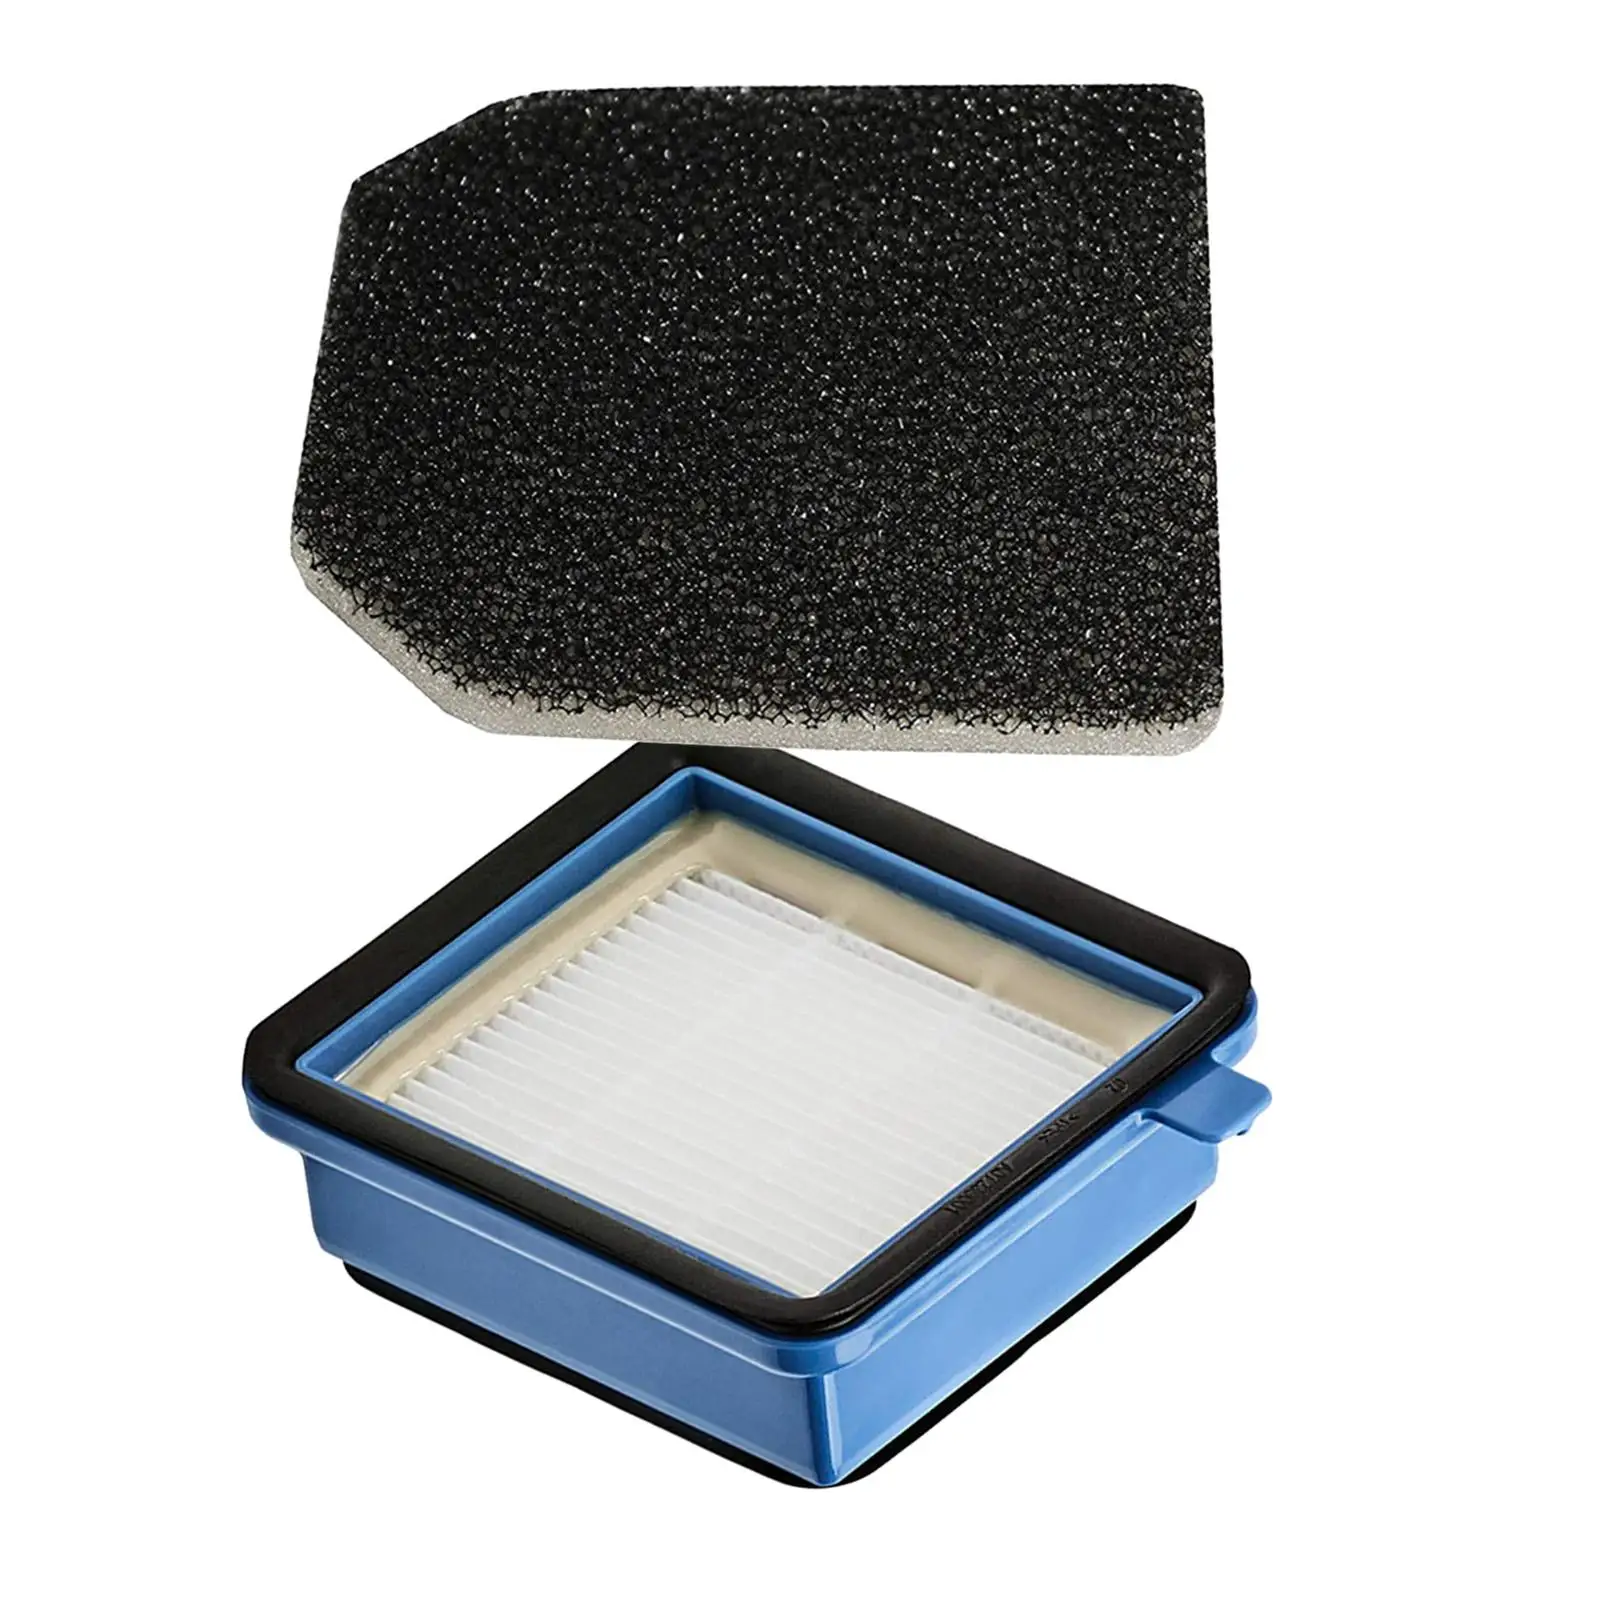 Vacuum Cleaner Filters Professional Accessory Replacements for QX6 QX7 Robot Cleaners